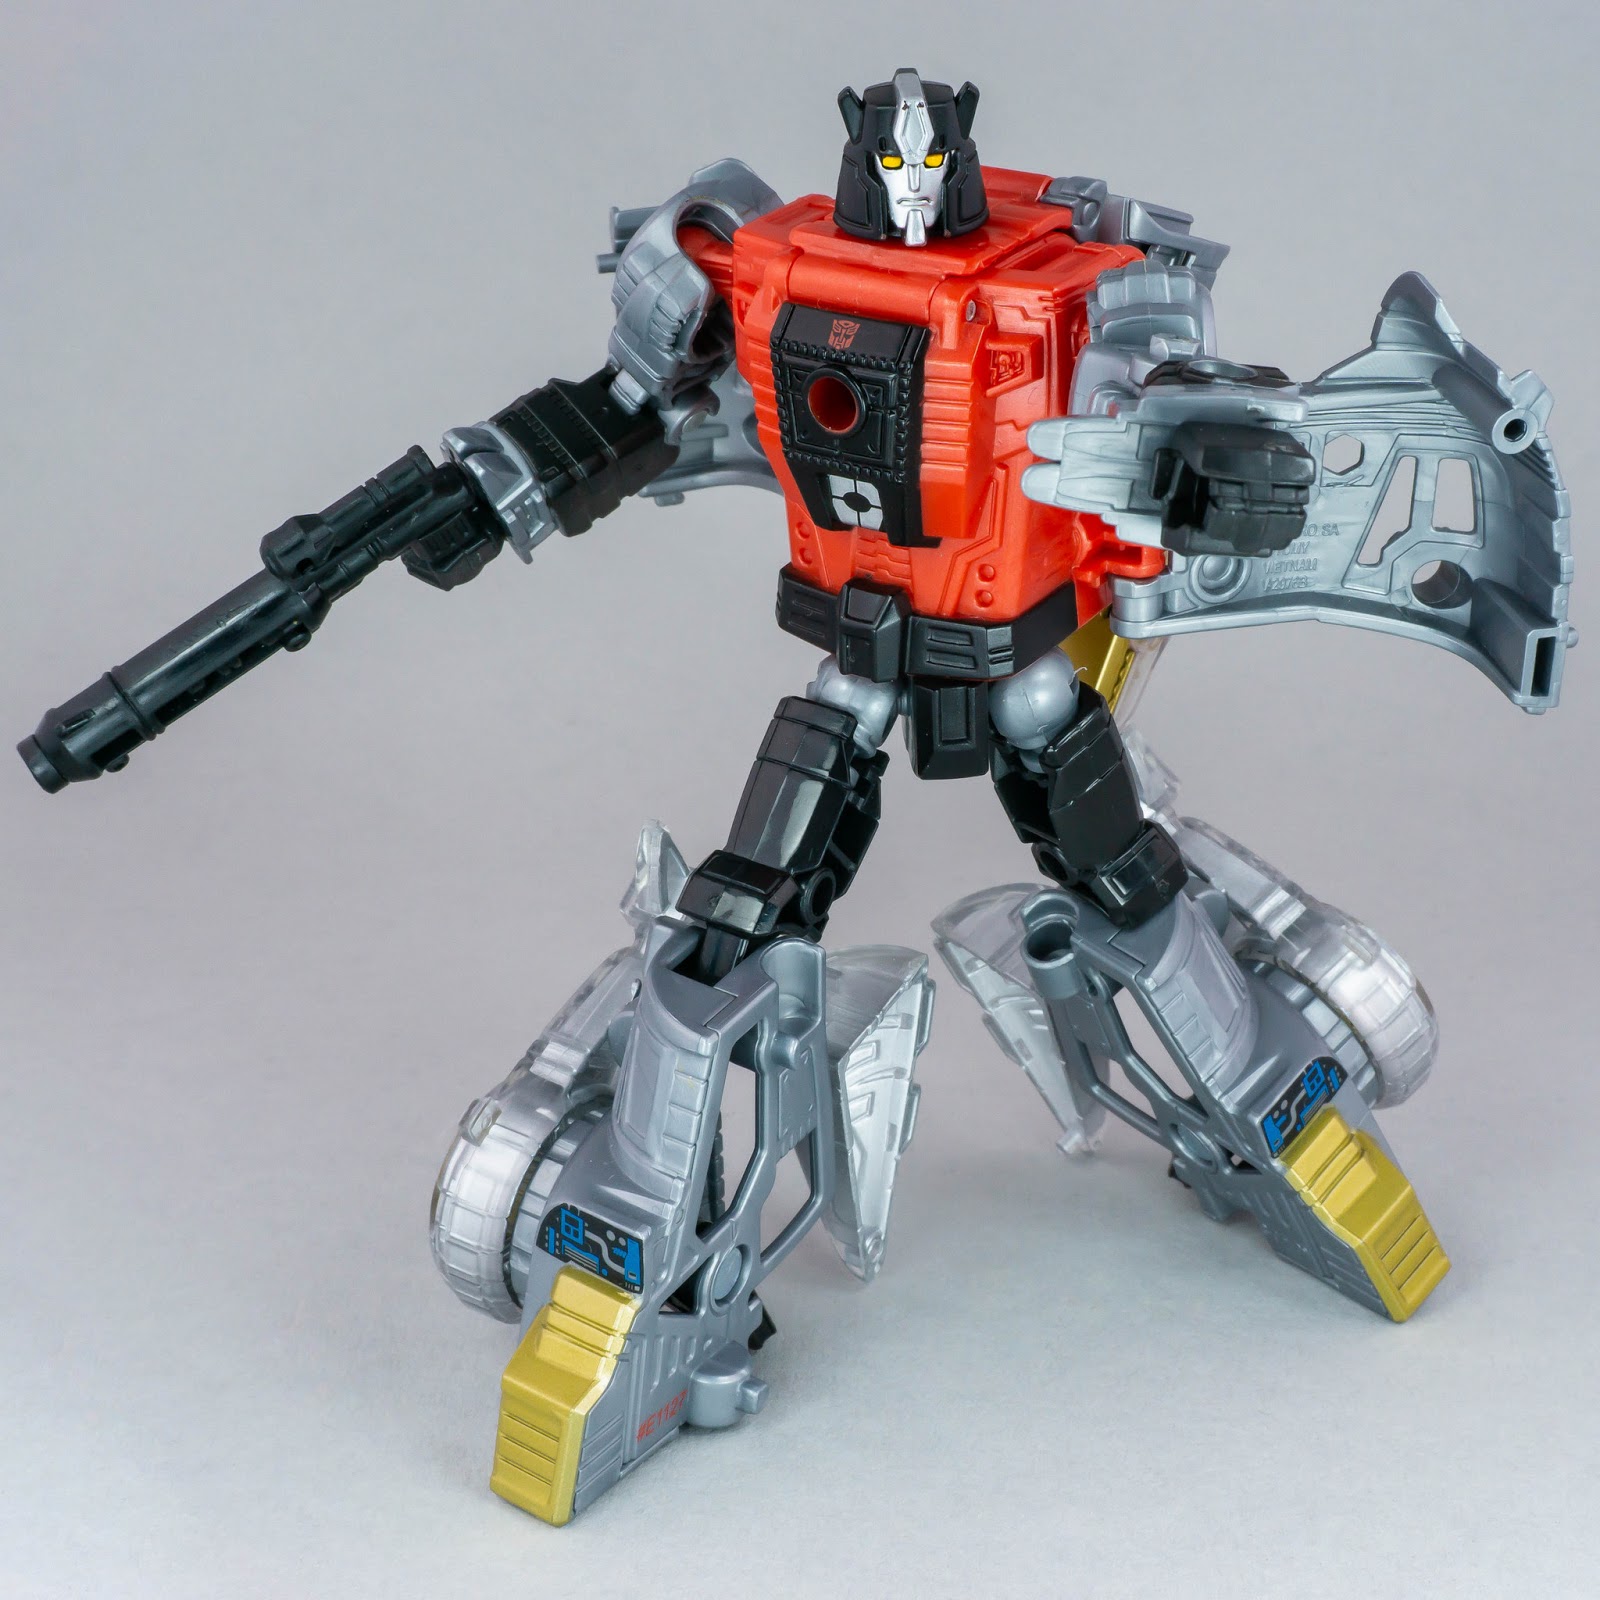 Transformers Power of the Primes Sludge robot mode posed 2